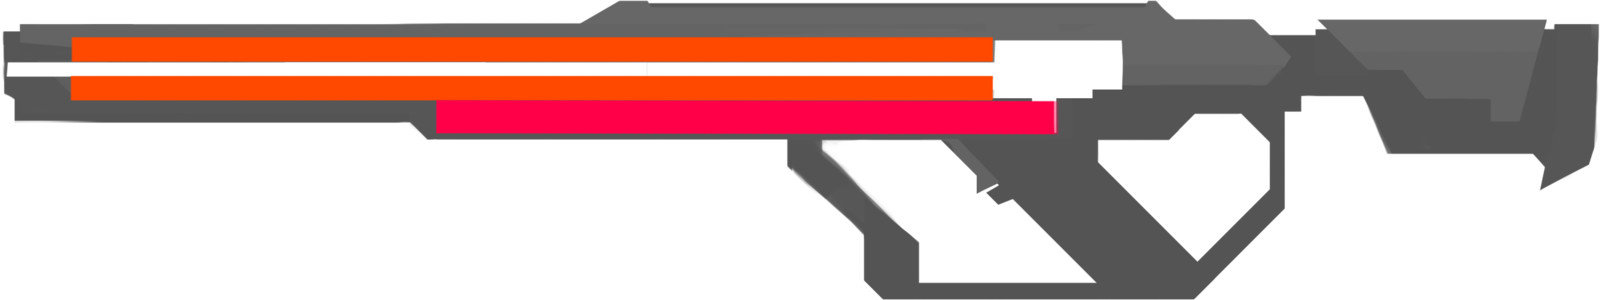 A lot of the criticism I often got when designing these weapons were ergonomics, so I took more care in implementing them. The orange denotes the railgun barrel, and the red represents the location of the horizontal magazine.